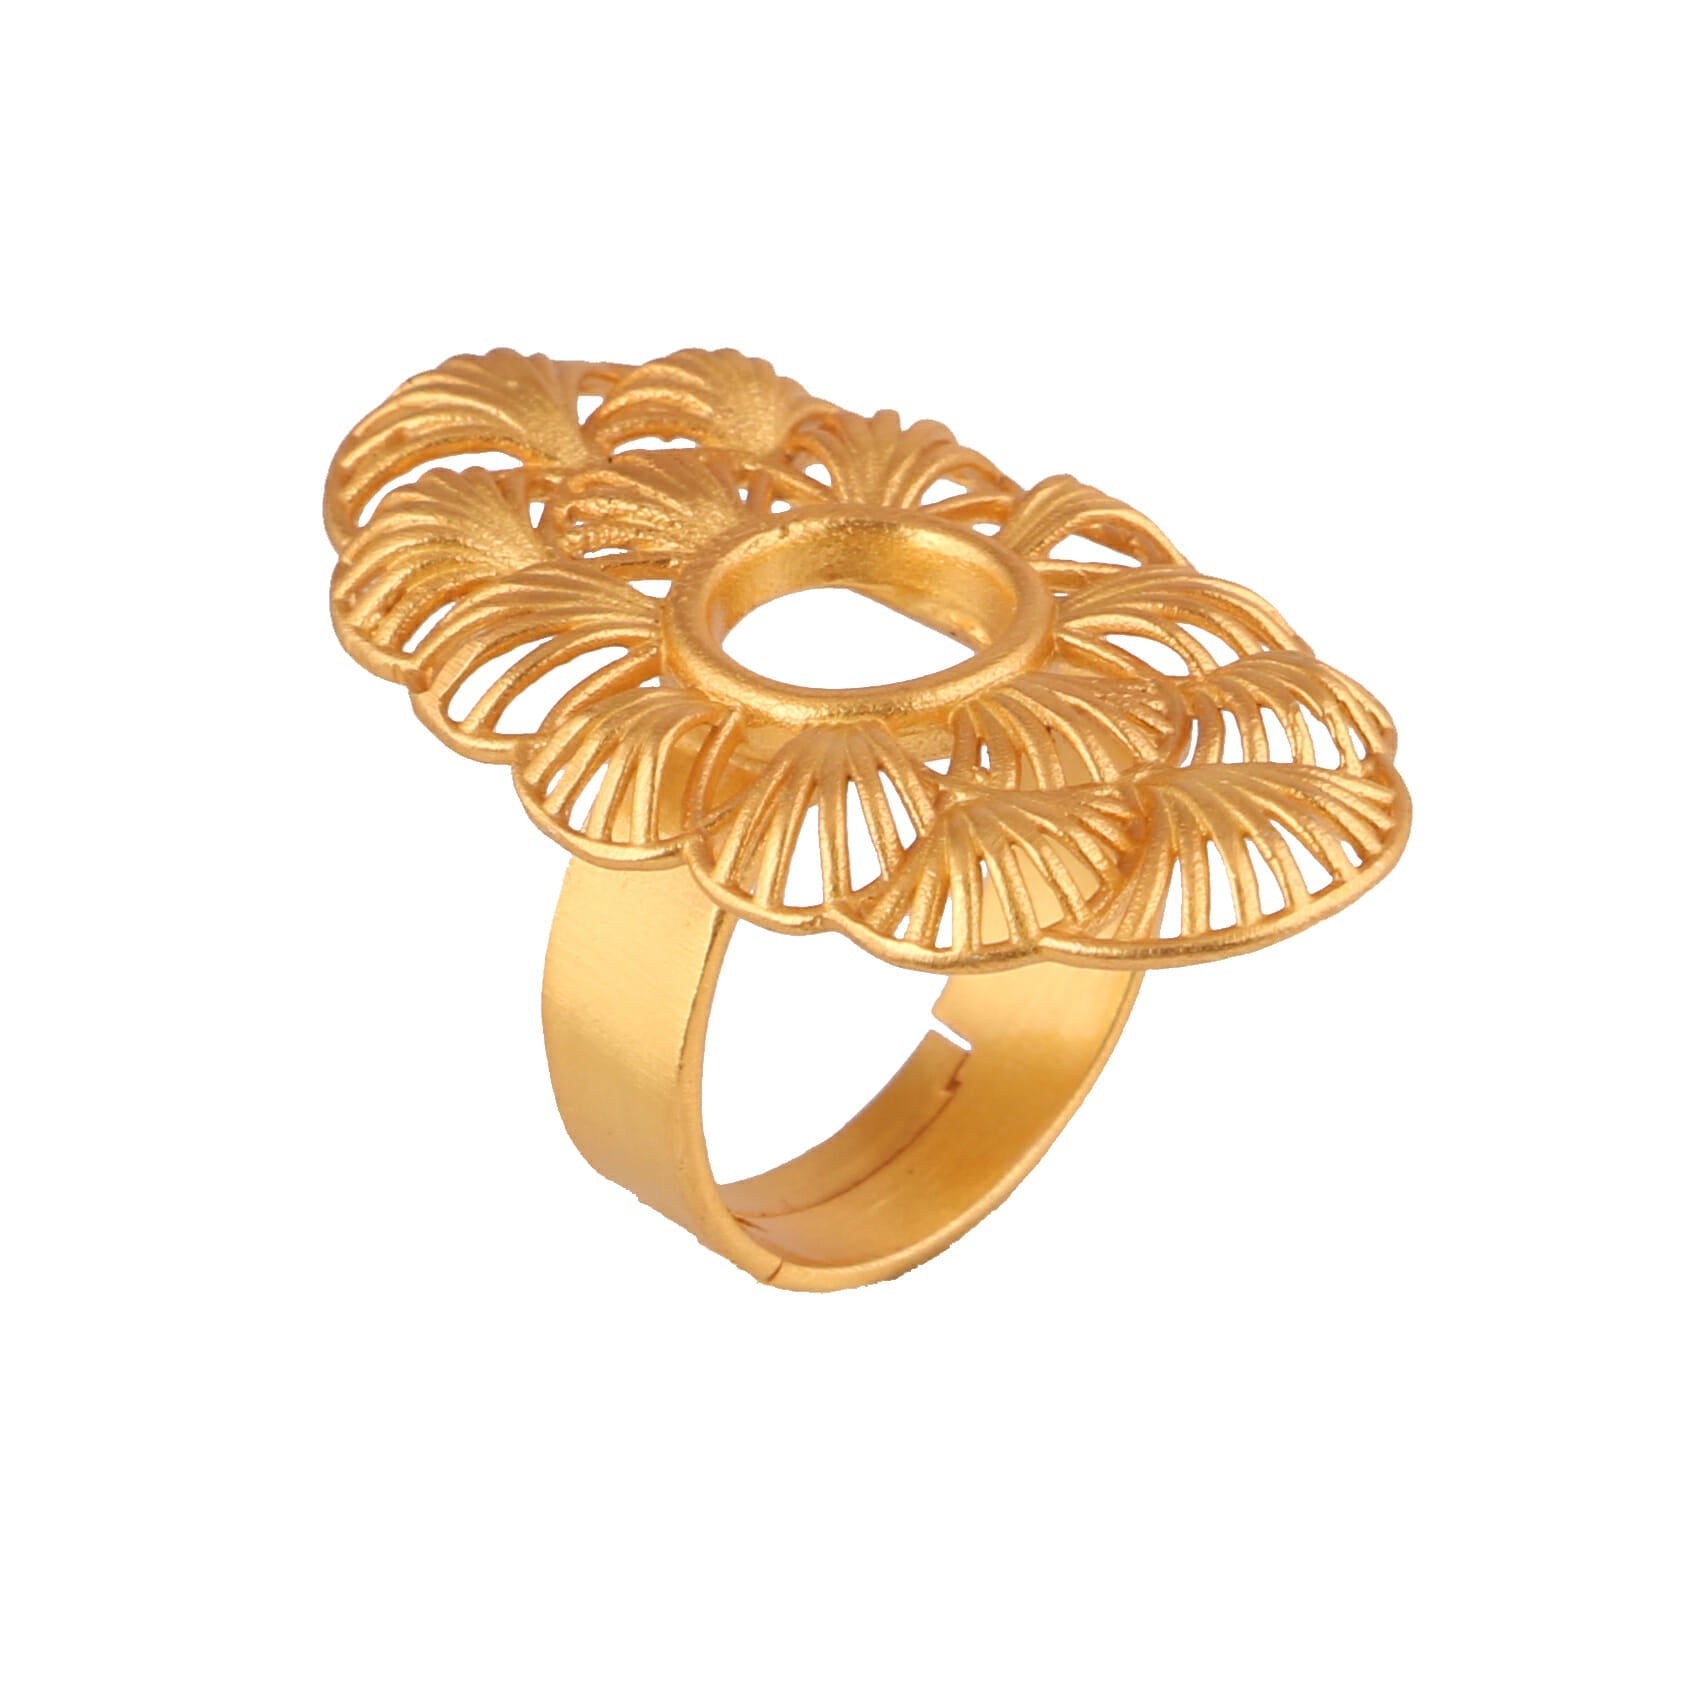 Ready to Bloom Ring